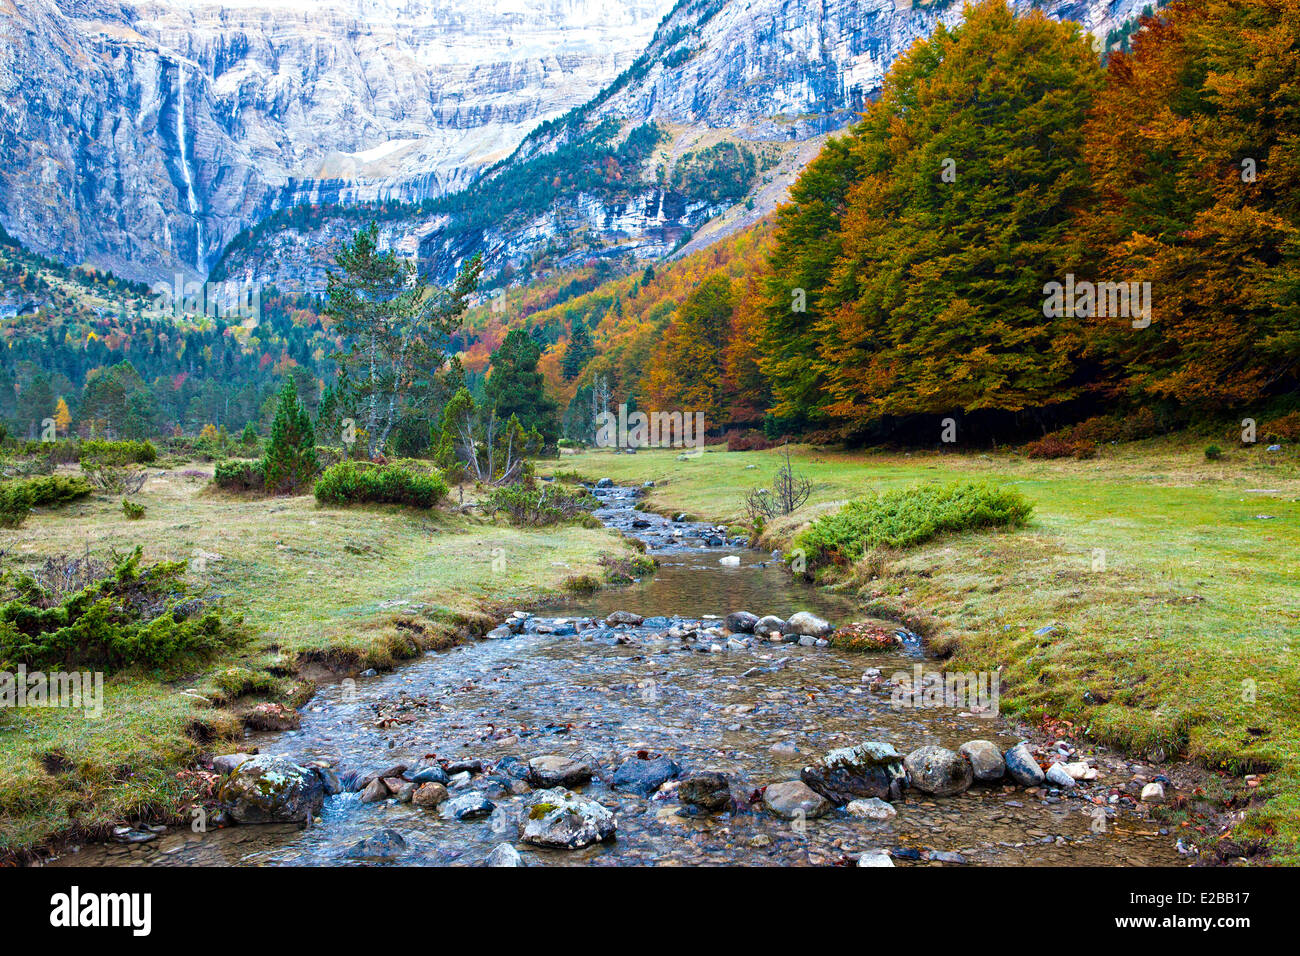 France, Hautes Pyrenees, cirque of Gavarnie listed as World Heritage by UNESCO Stock Photo